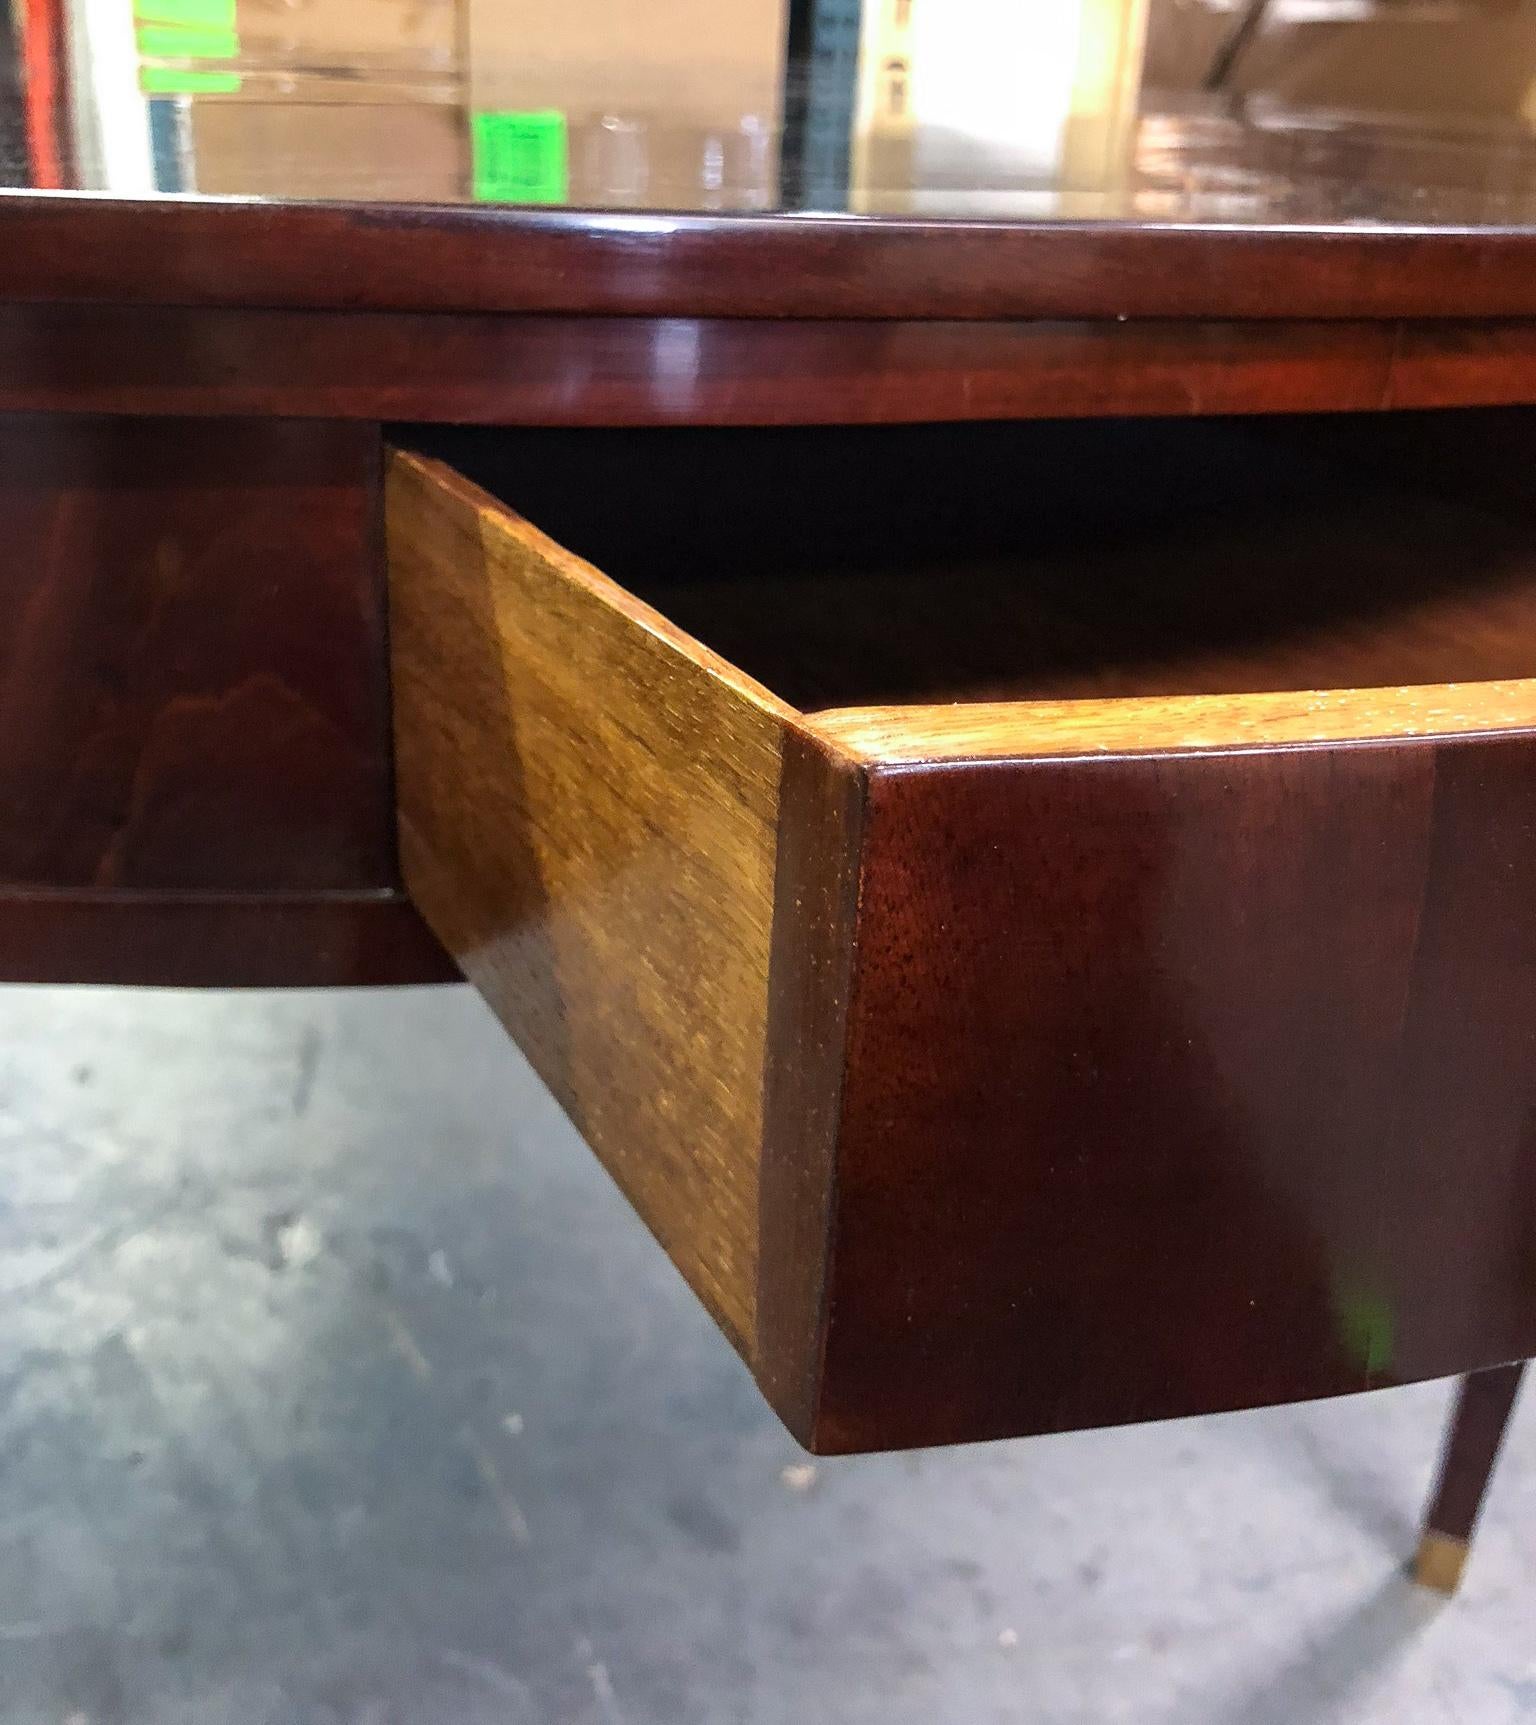 Mahogany veneer on an oak carcass. Four drawers in the apron with brass pulls opening to an oak interior. Raised on four square tapered legs with brass sabots.

OUR REFERENCE N3691